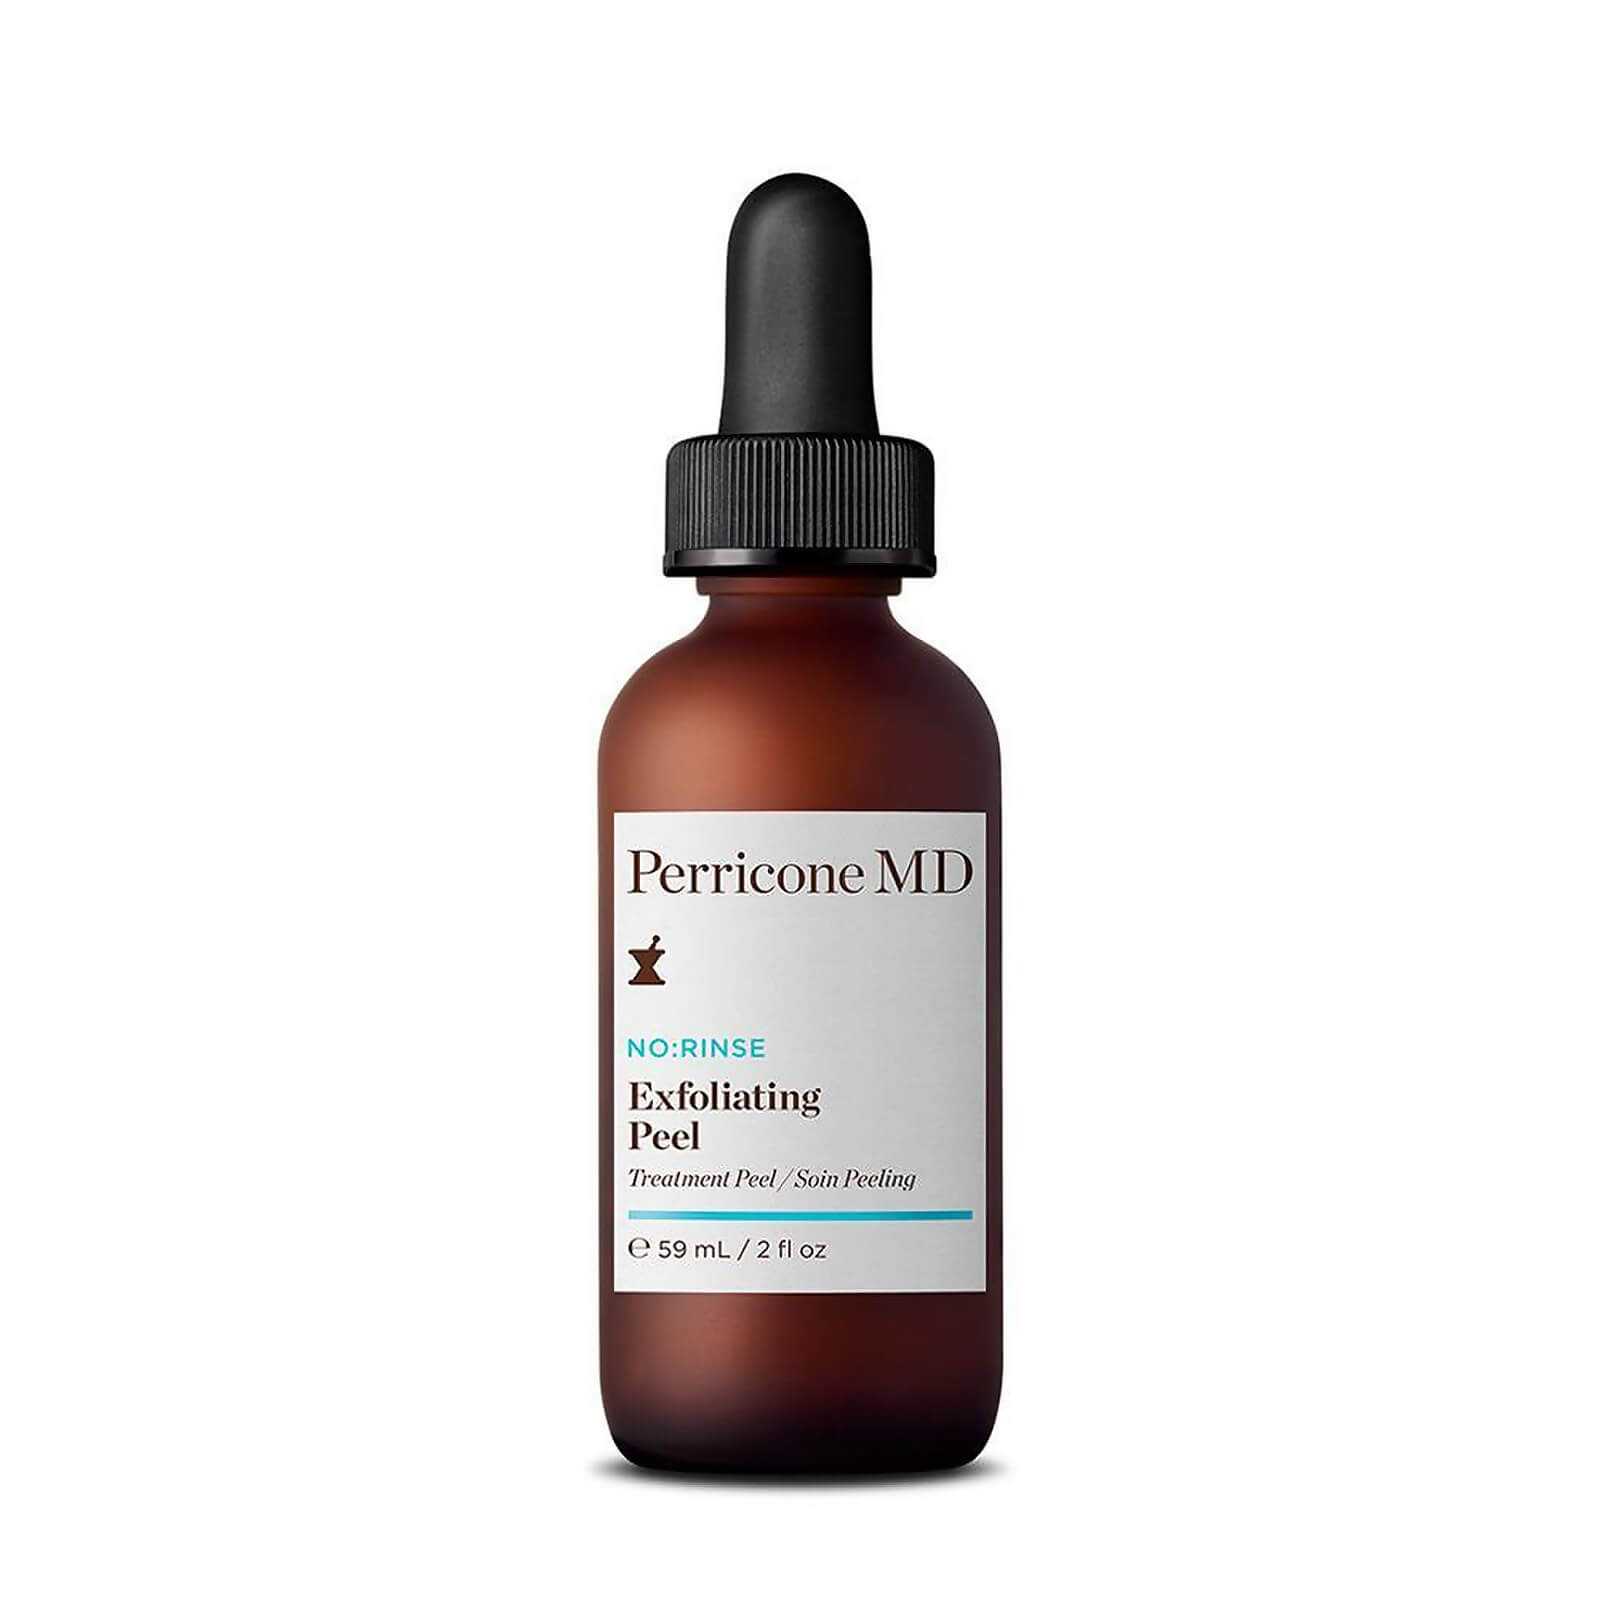 Image of Perricone MD No:Rinse Exfoliating Peel 59ml